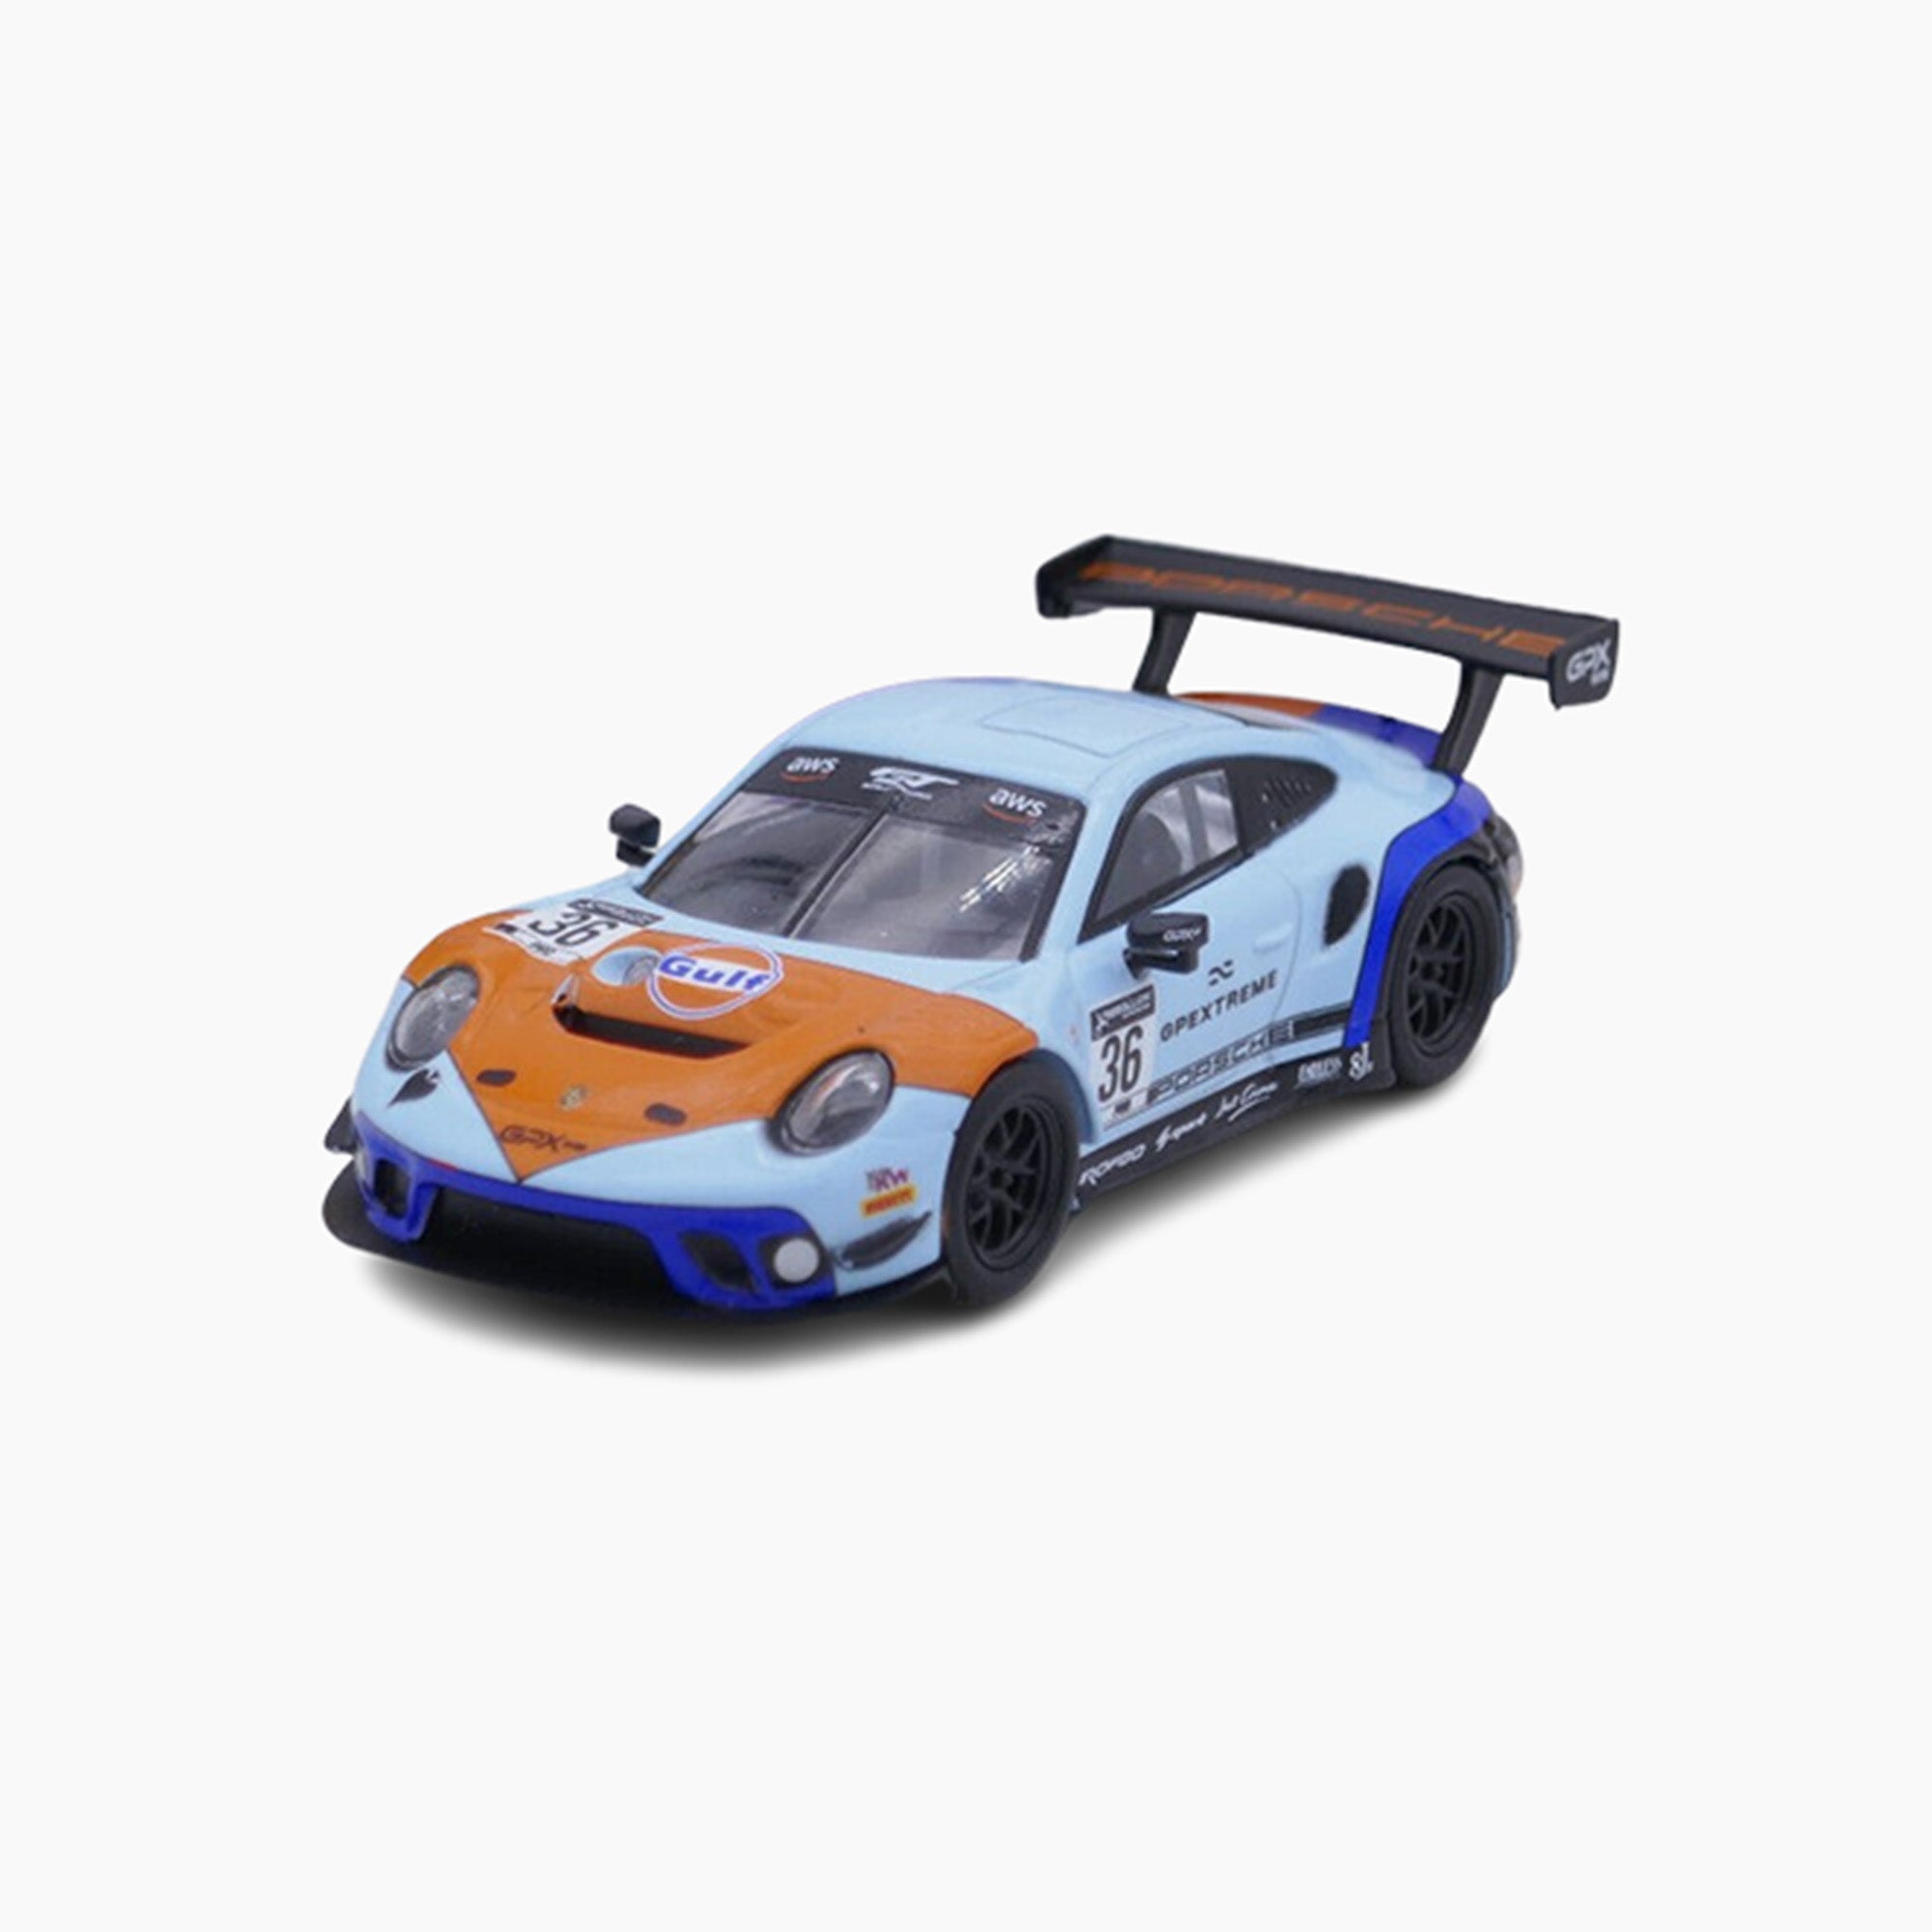 Porsche GT3 R GPX Racing No.36 "The Spade" | 1:64 Scale Model-1:64 Scale Model-Spark Models-gpx-store